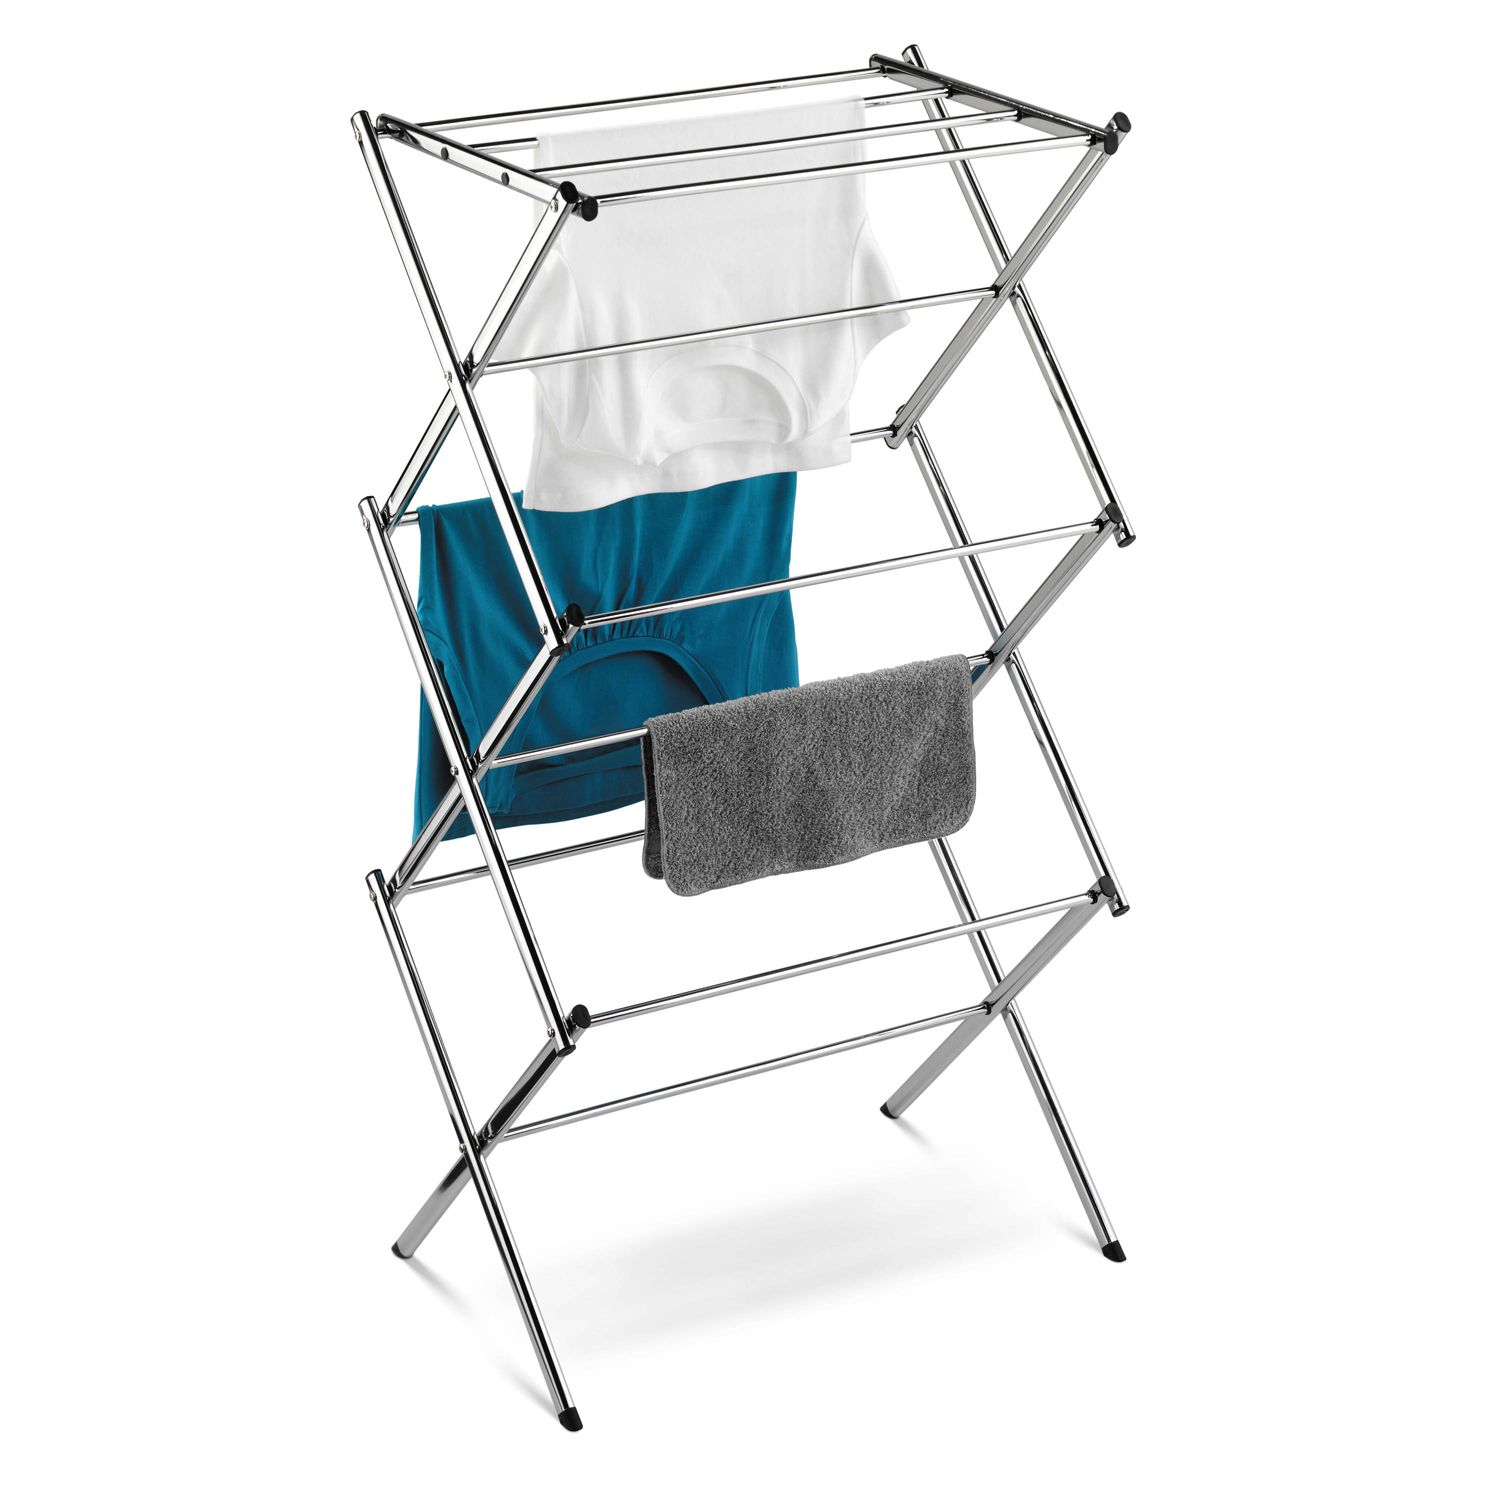 Image for Honey-Can-Do 18 Linear Feet Accordion Drying Rack at Kohl's.